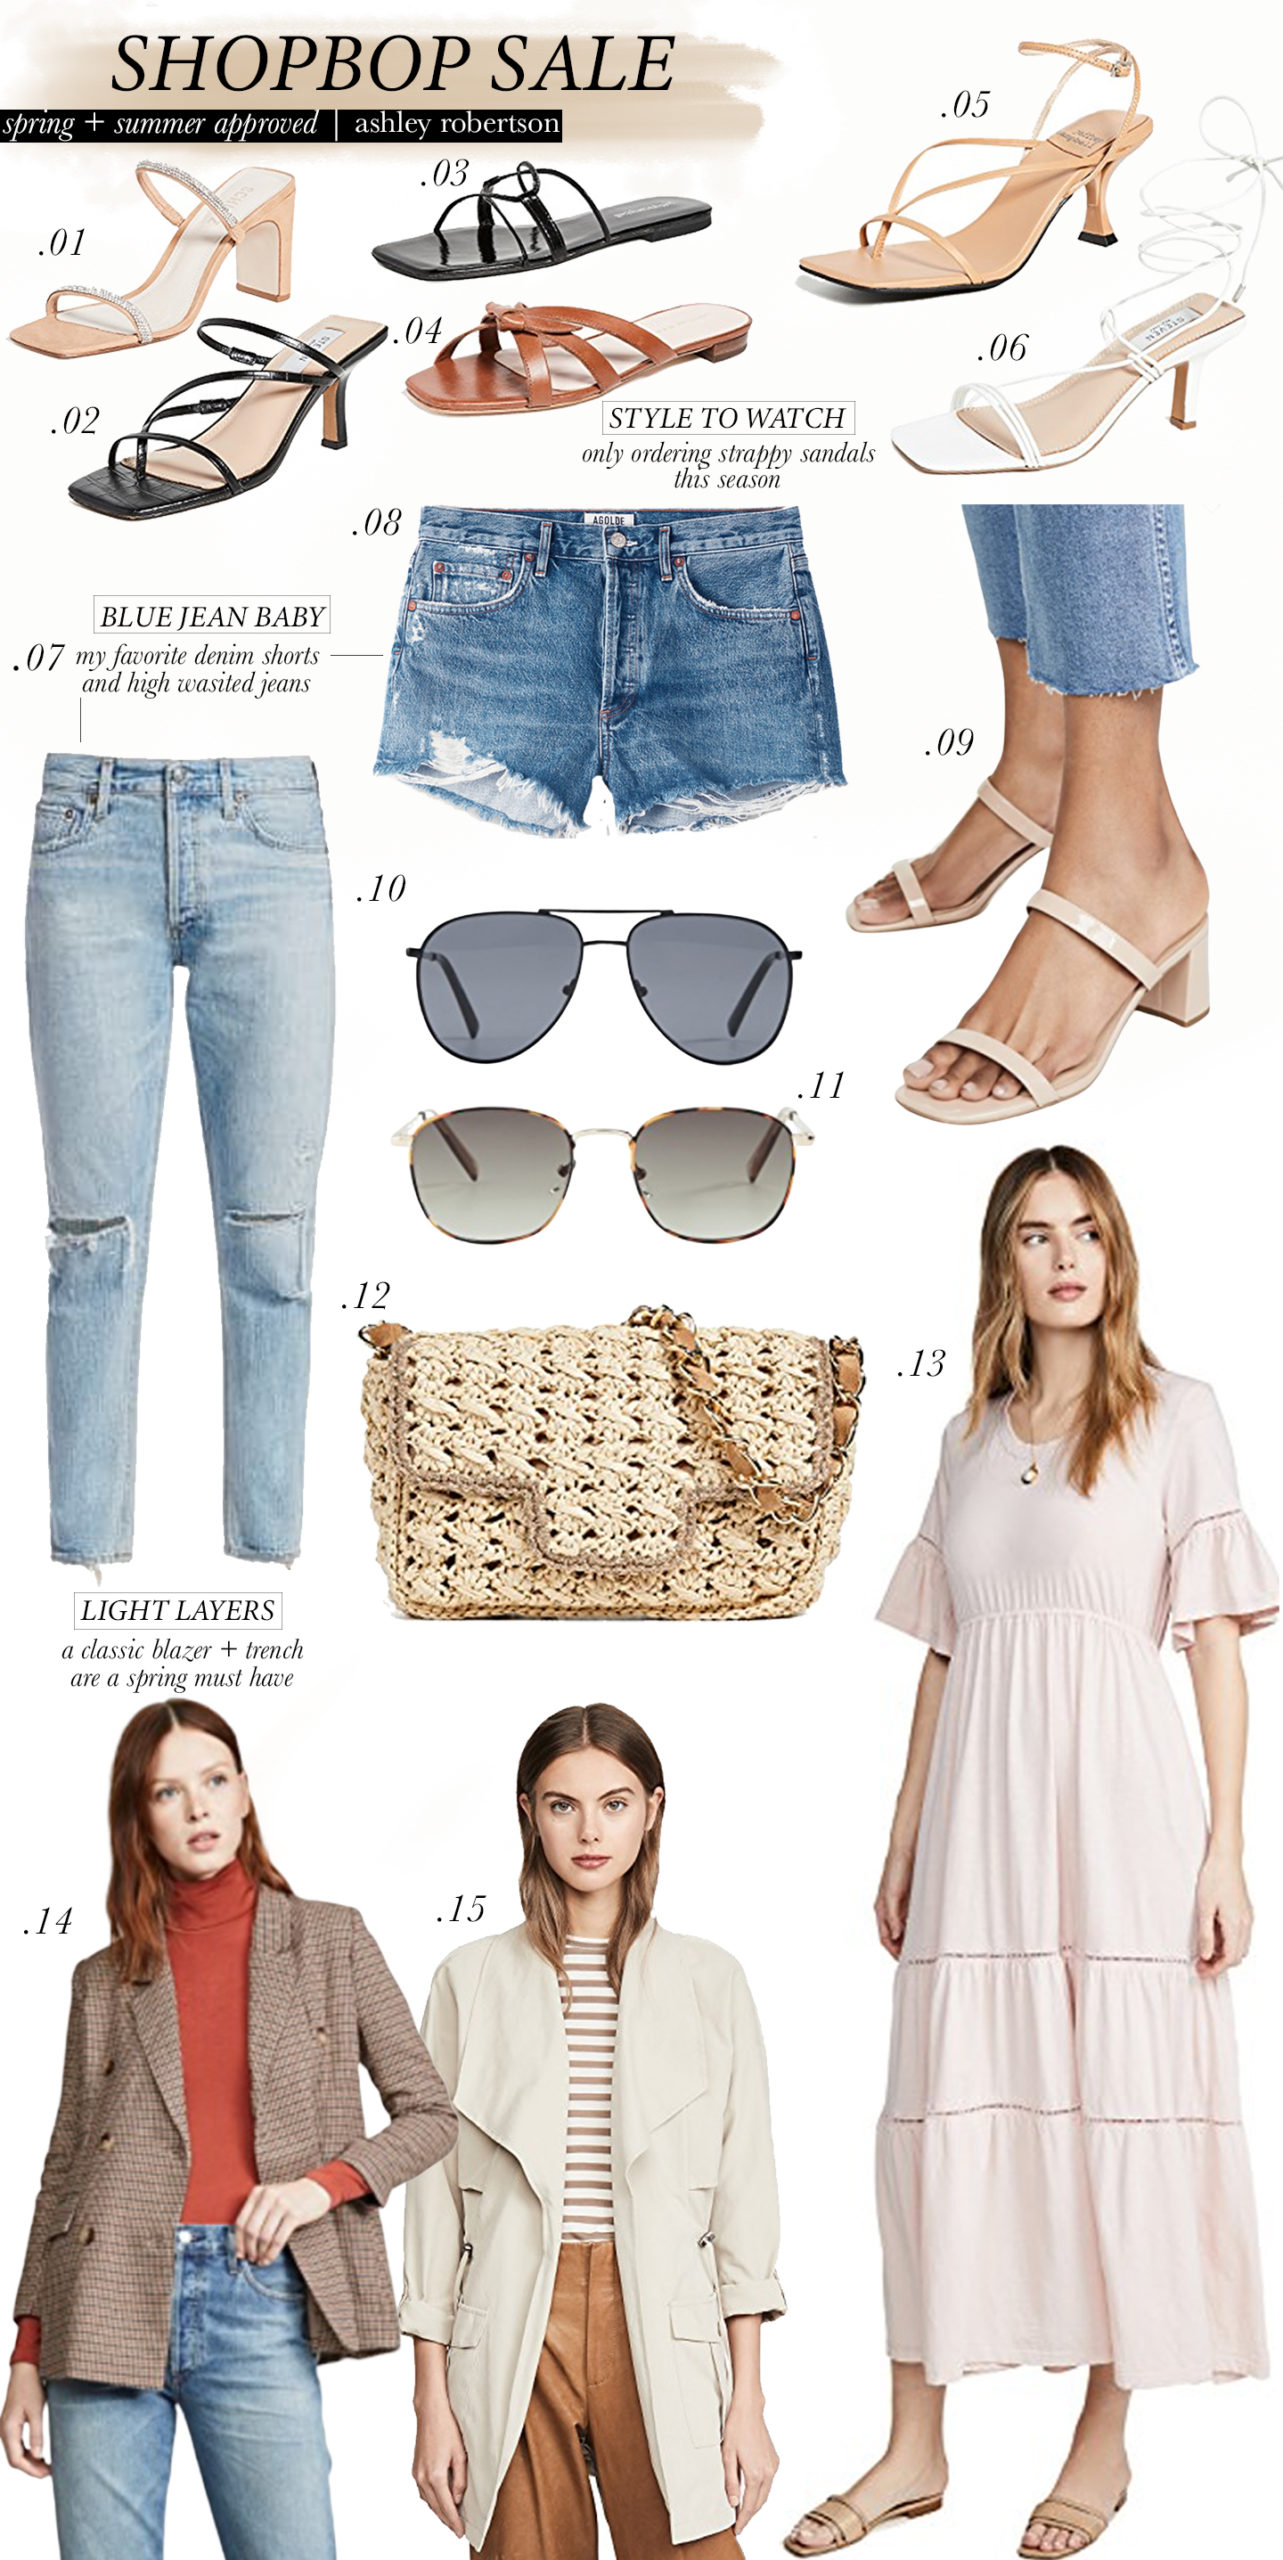 The Shopbop Spring Sale Just Started -- Here's What's In My Cart | The ...